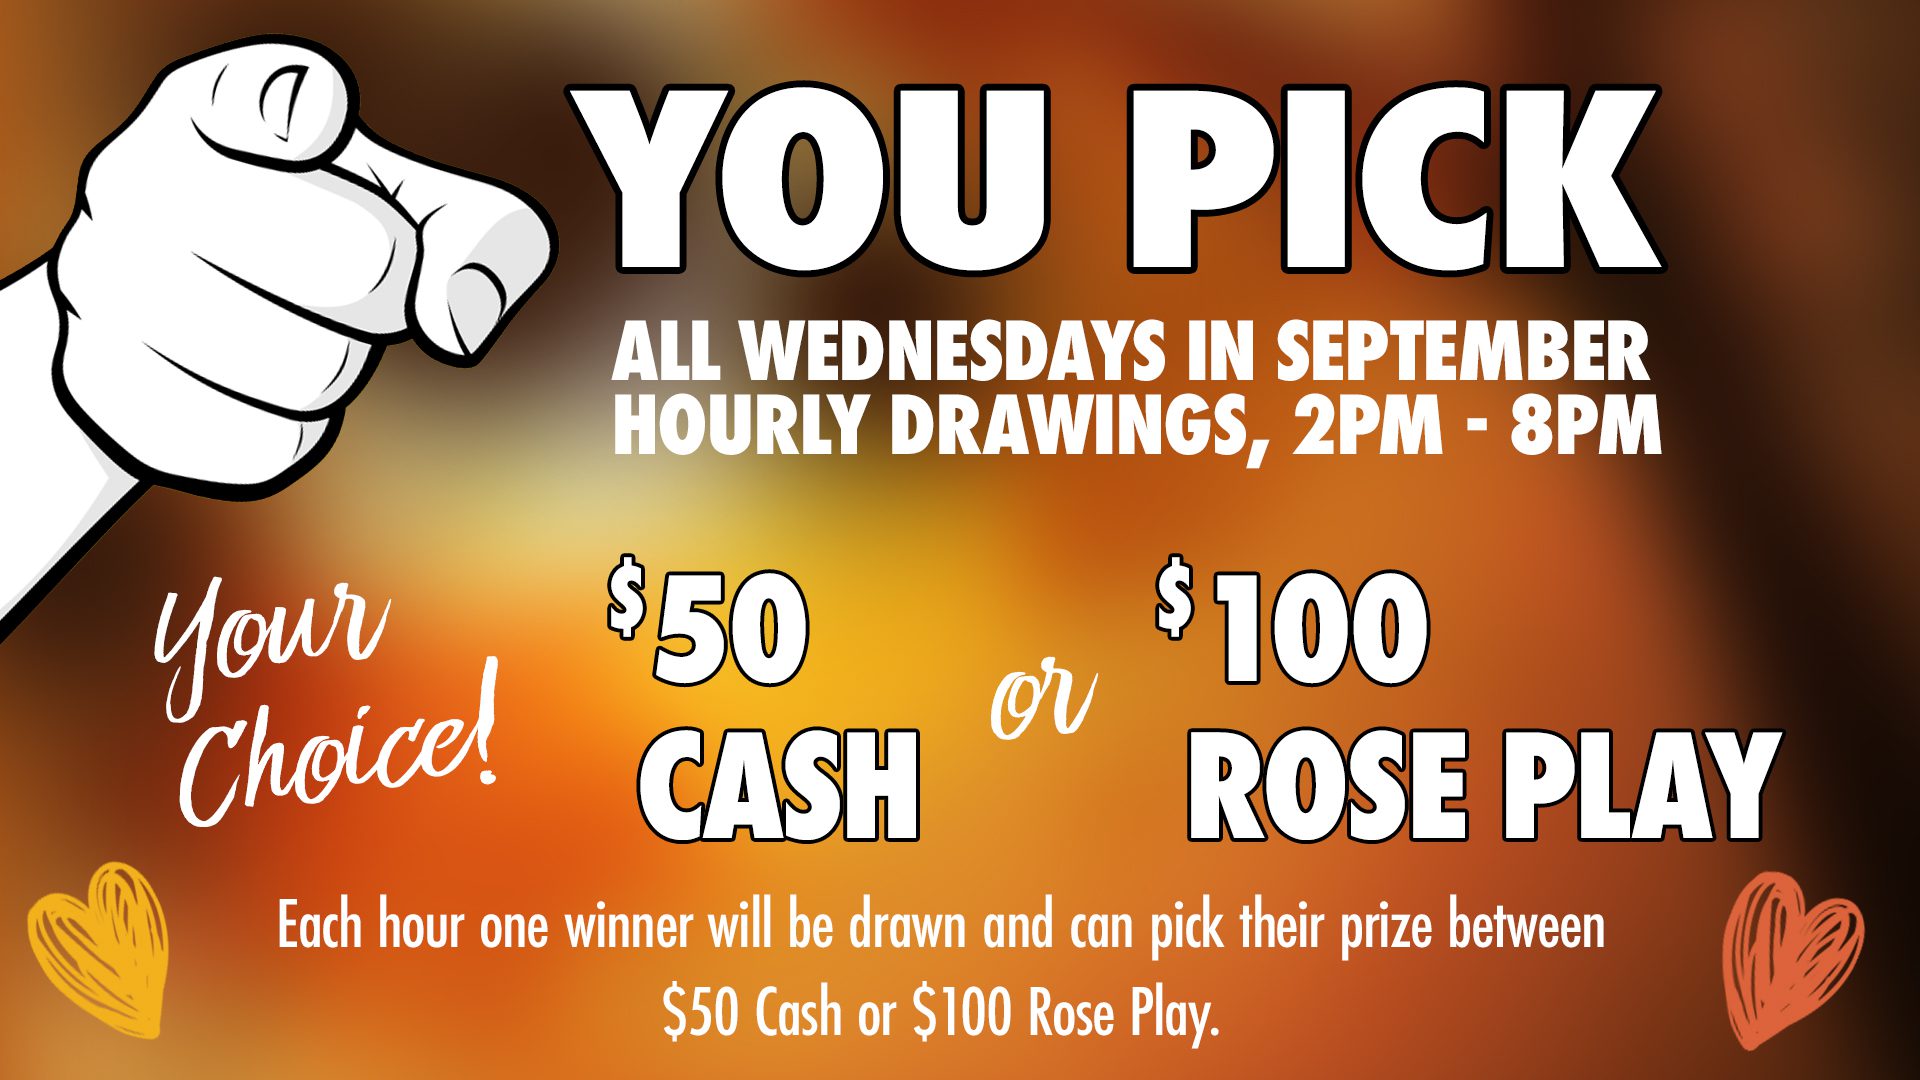 Promotional graphic for a choice-based prize drawing event with hourly opportunities to win cash or game credits.